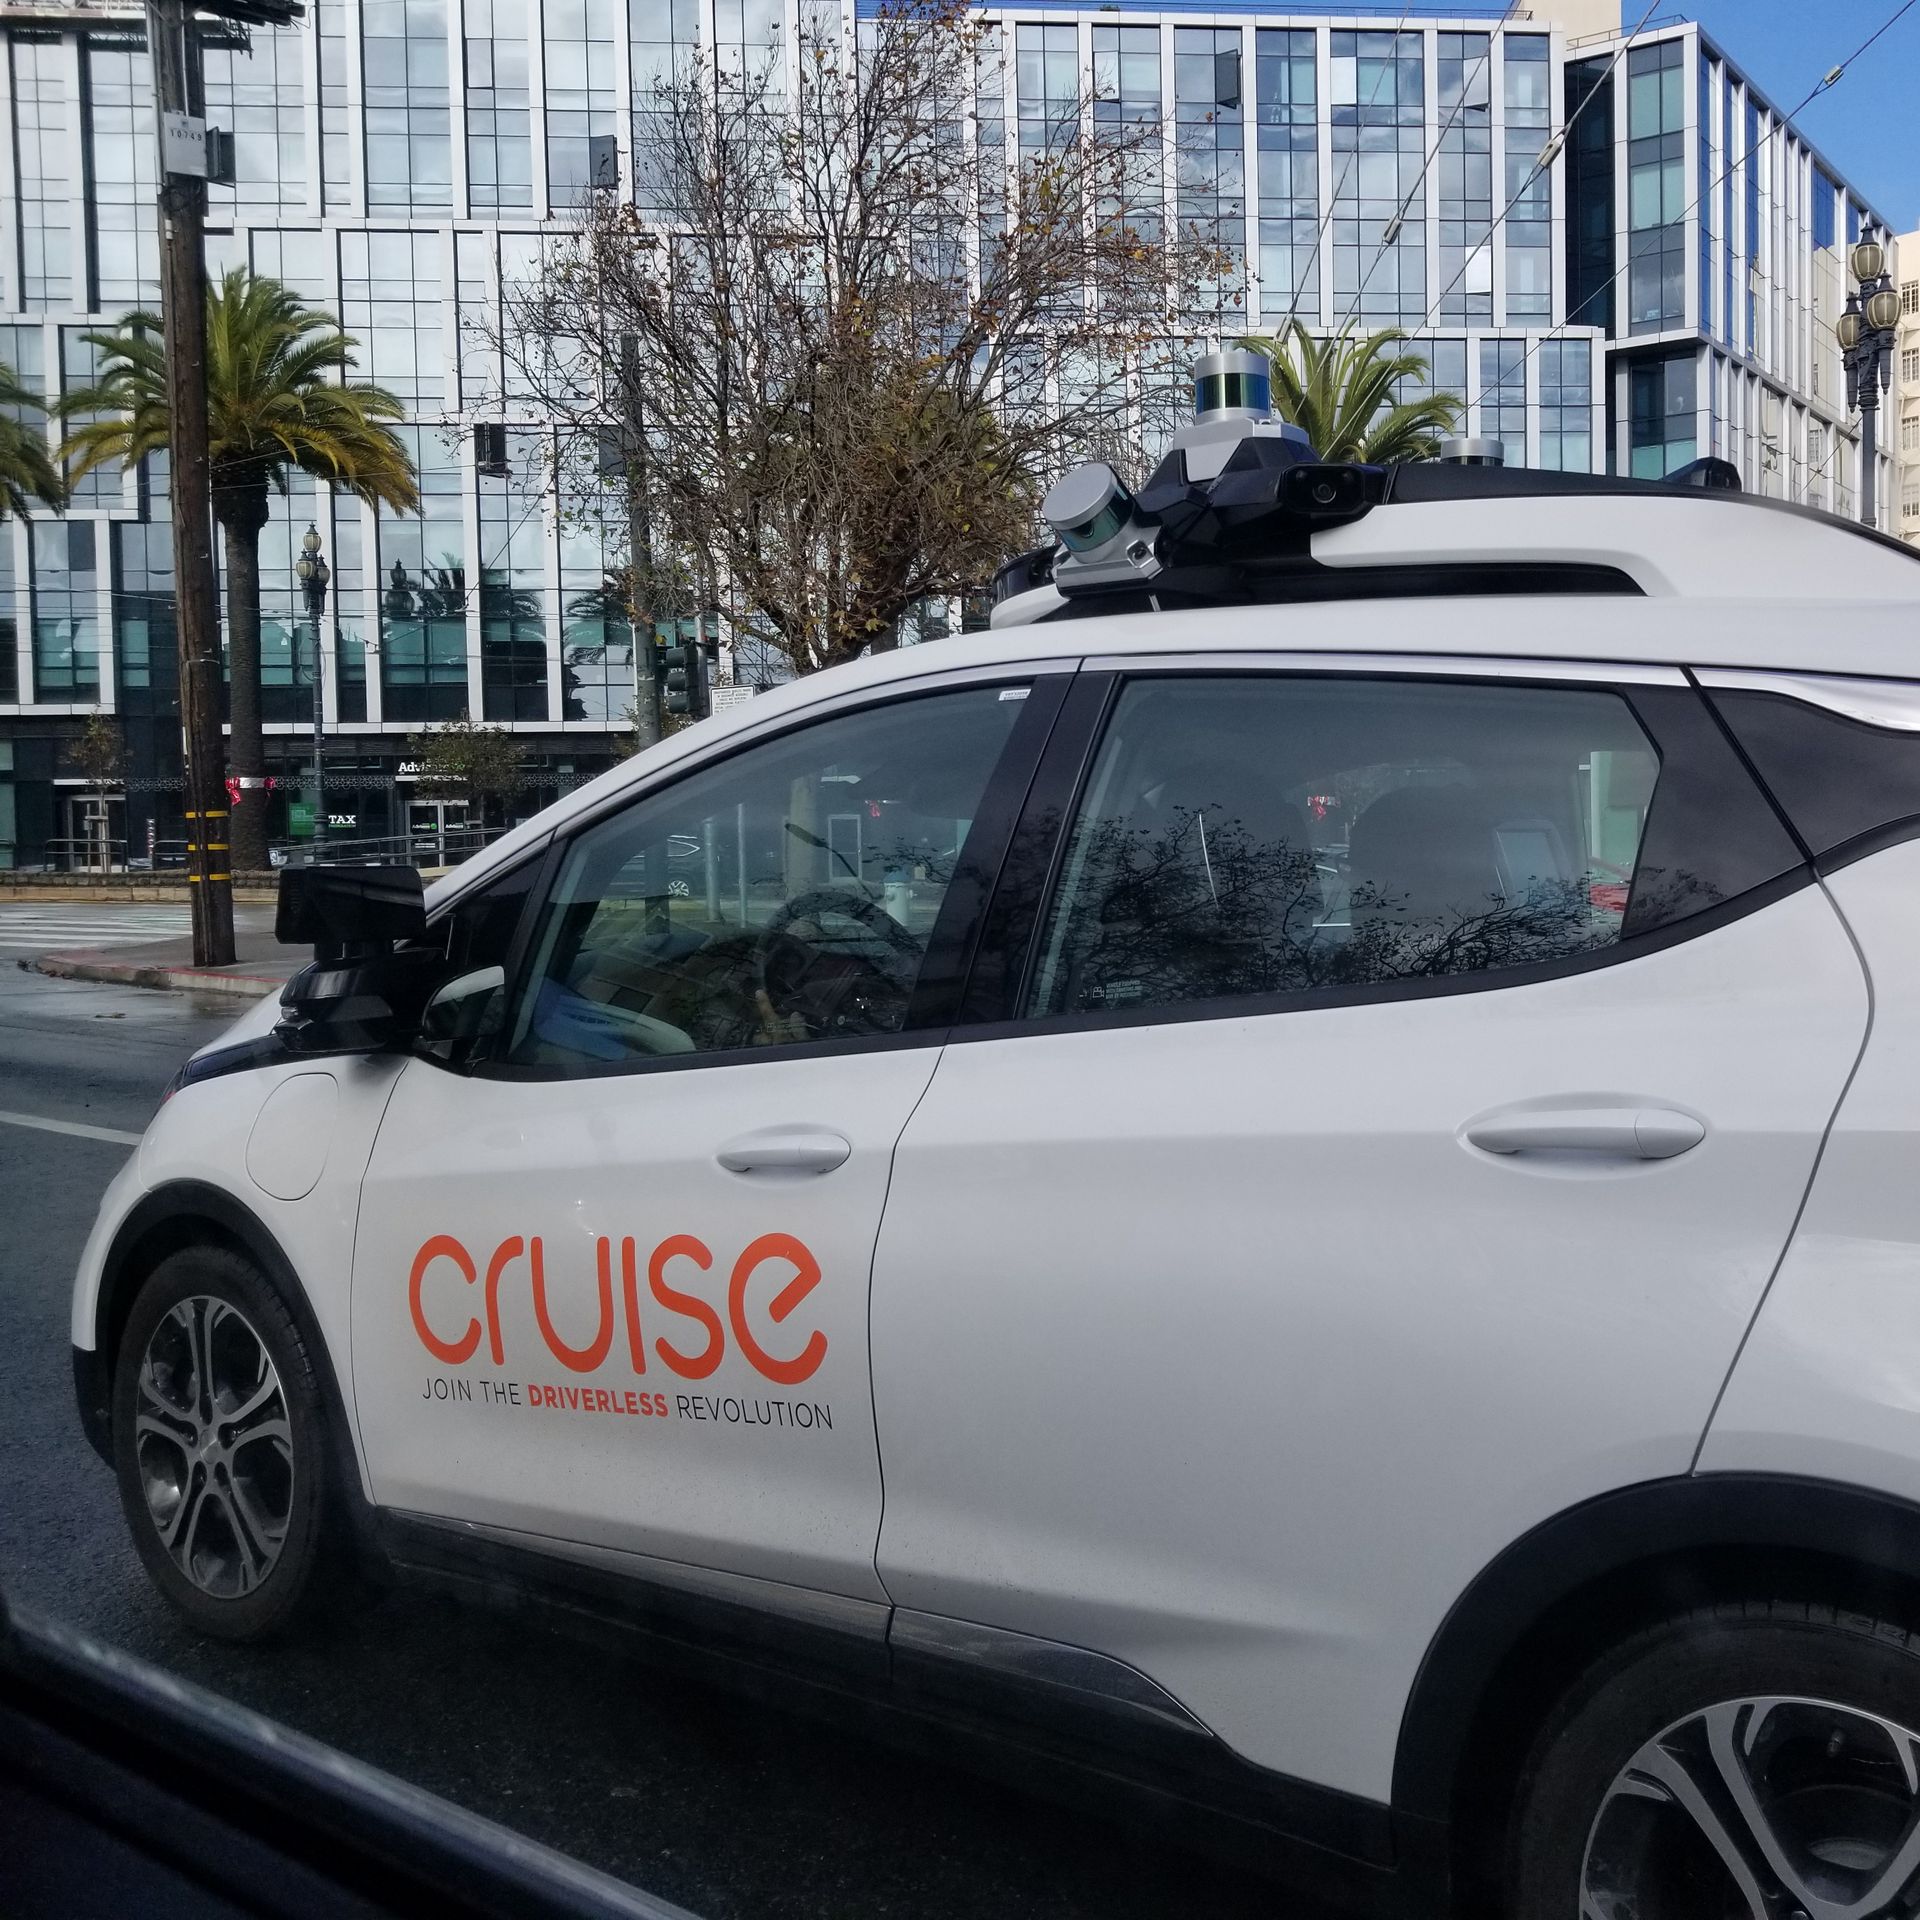 Self-driving car company Cruise begins testing in Raleigh - Axios